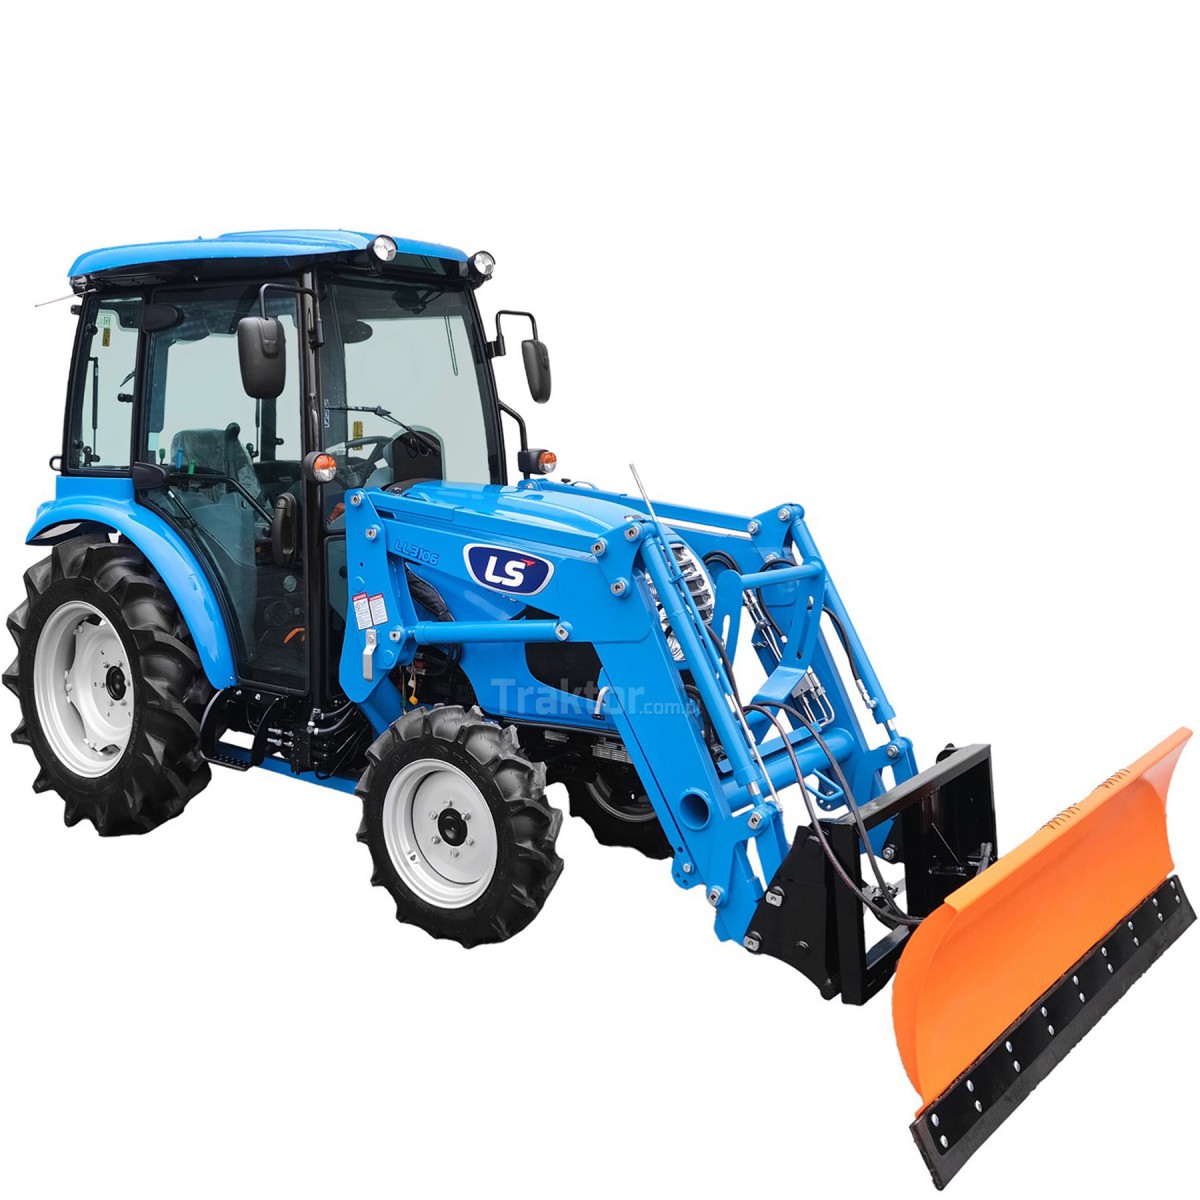 LS Tractor MT3.40 HST 4x4 - 40 HP / CAB + LS LL3106 front loader + straight snow plow 200 cm, with Euro frame (TUR) 4FARMER